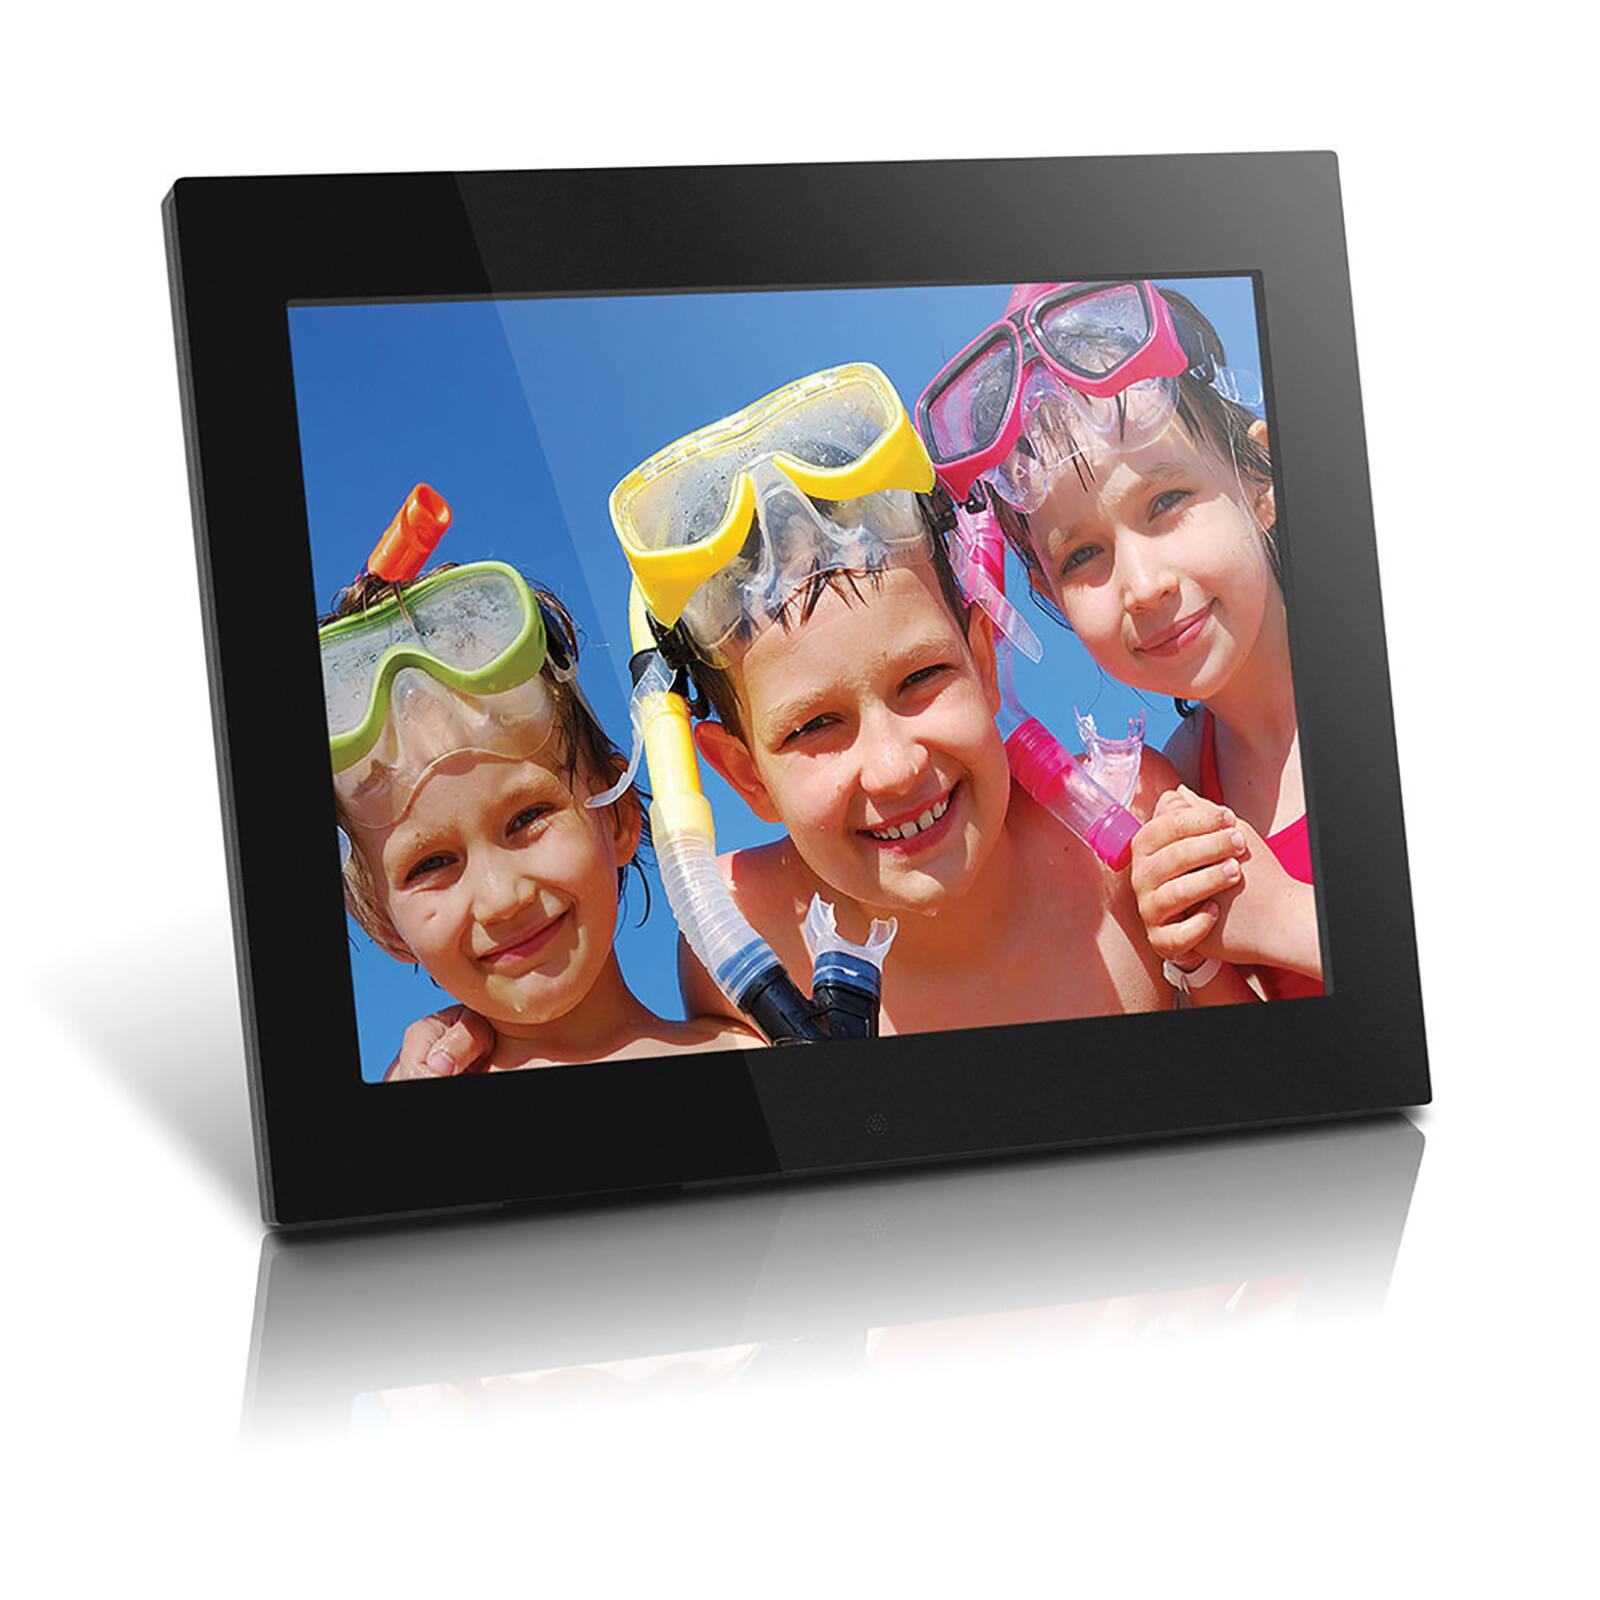 Aluratek 14” LCD Digital Photo Frame with 4GB Built-in Memory with Remote ADMPF214FB Black USB SD/SDHC Support w/White Matting 